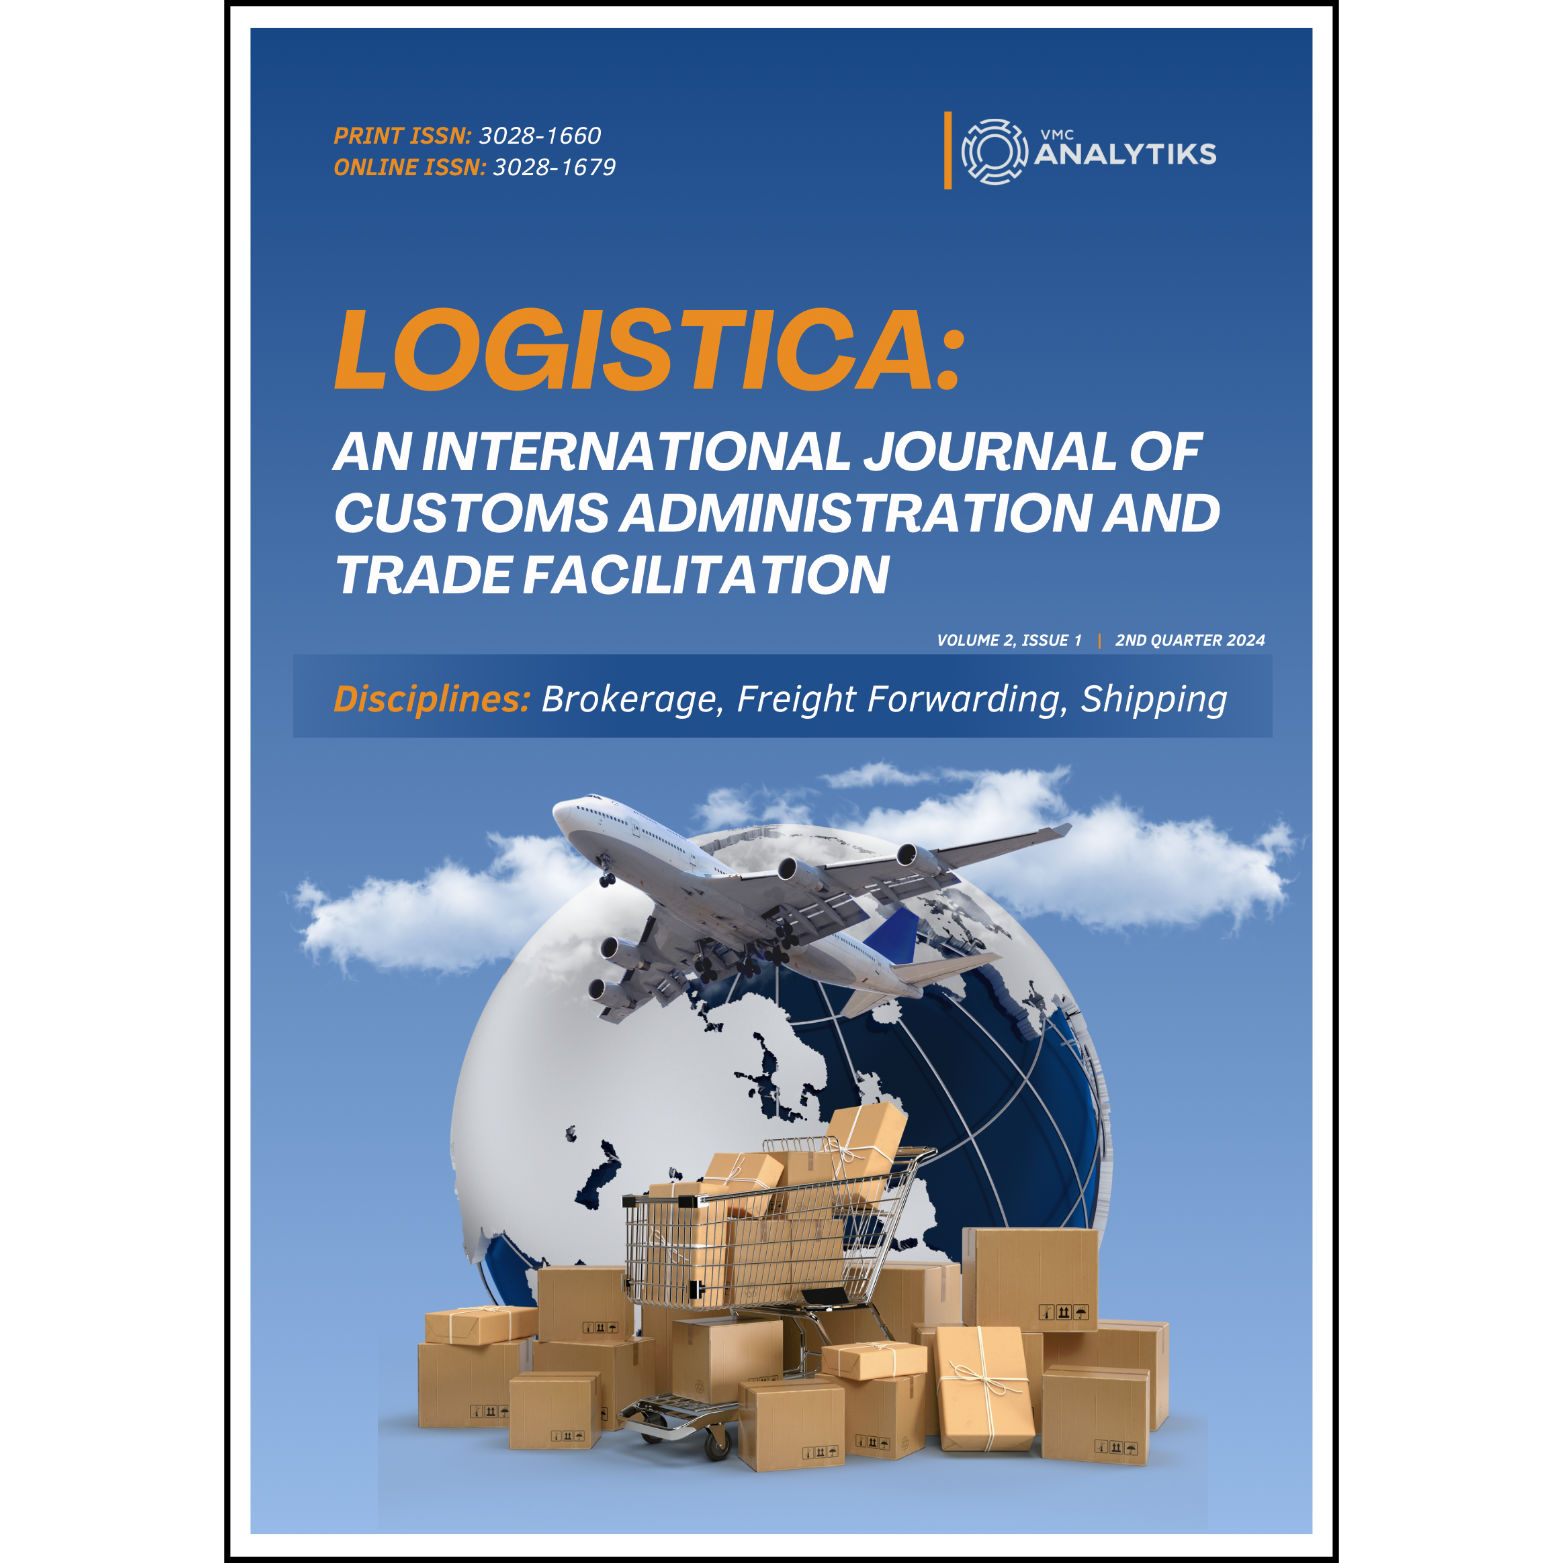 Logistica: An International Journal of Customs Administration and Trade Facilitation